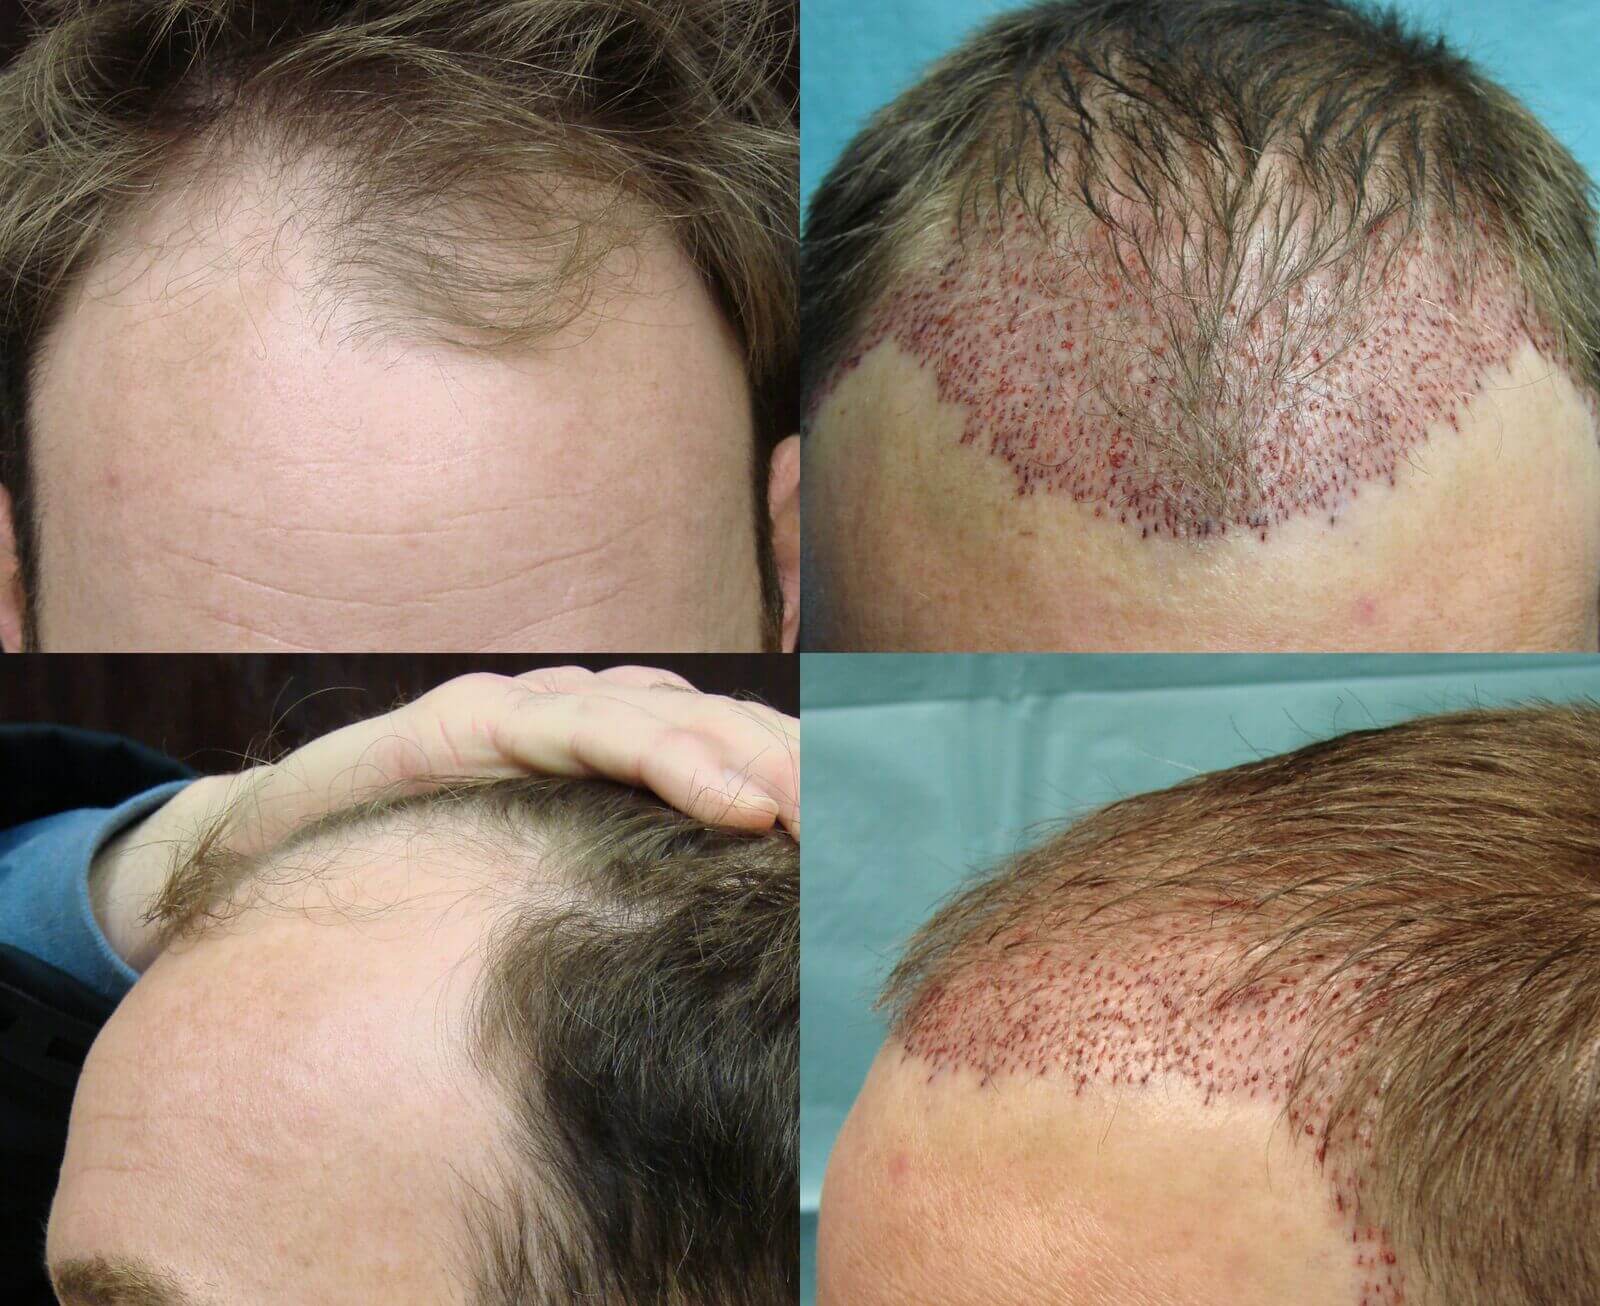 FUE Hair Transplant 1349 Grafts Into Crown - The Maitland Clinic